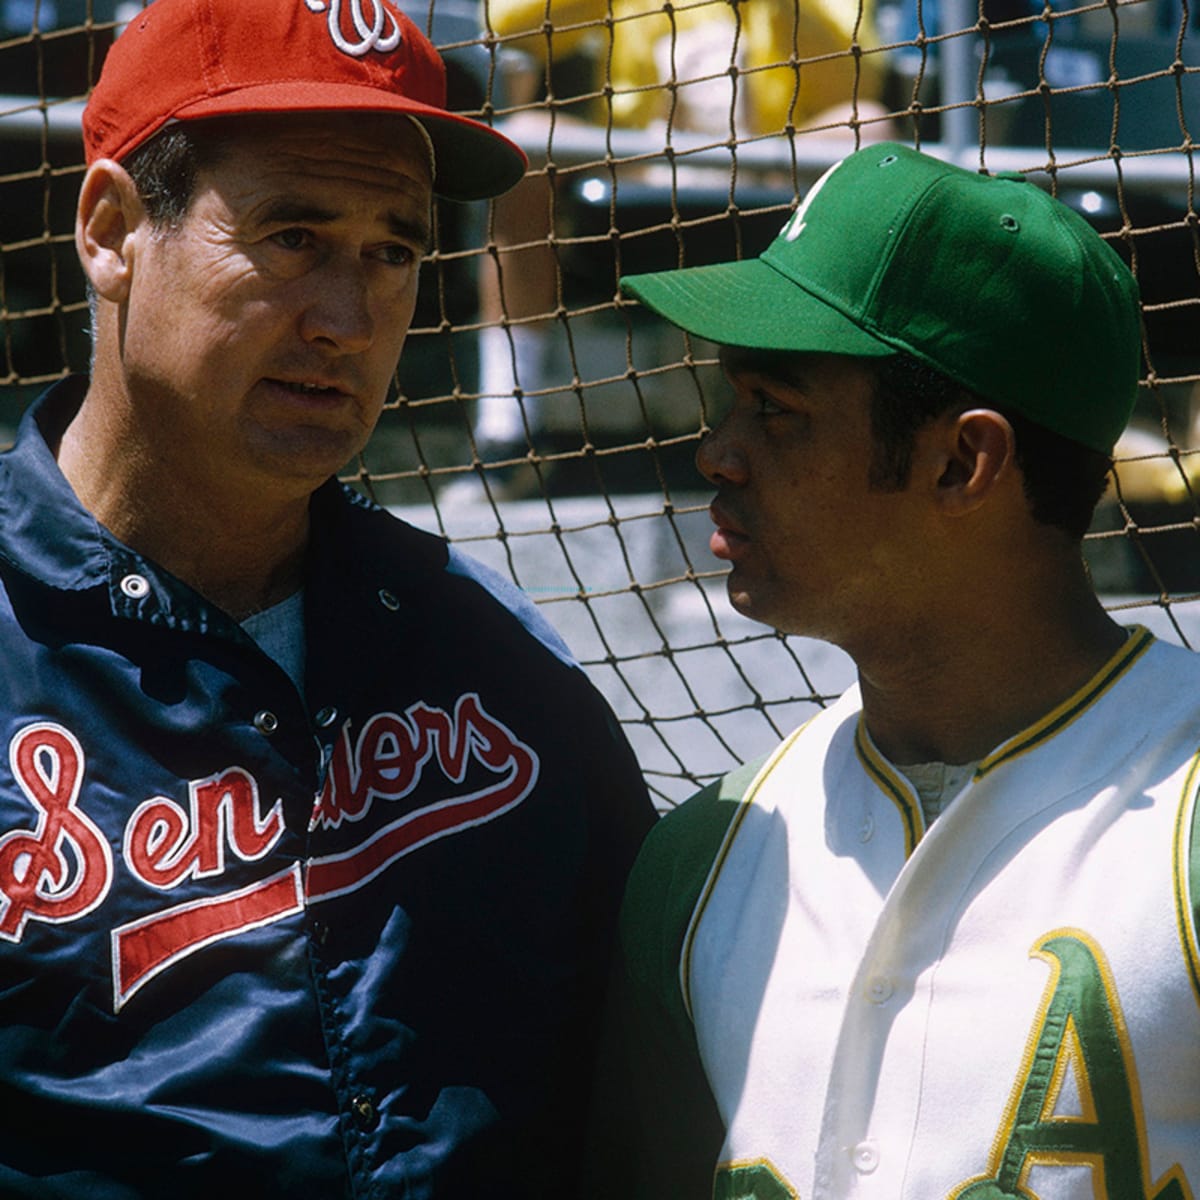 After two skillful weeks with the Senators, Ted Williams was back - Sports  Illustrated Vault